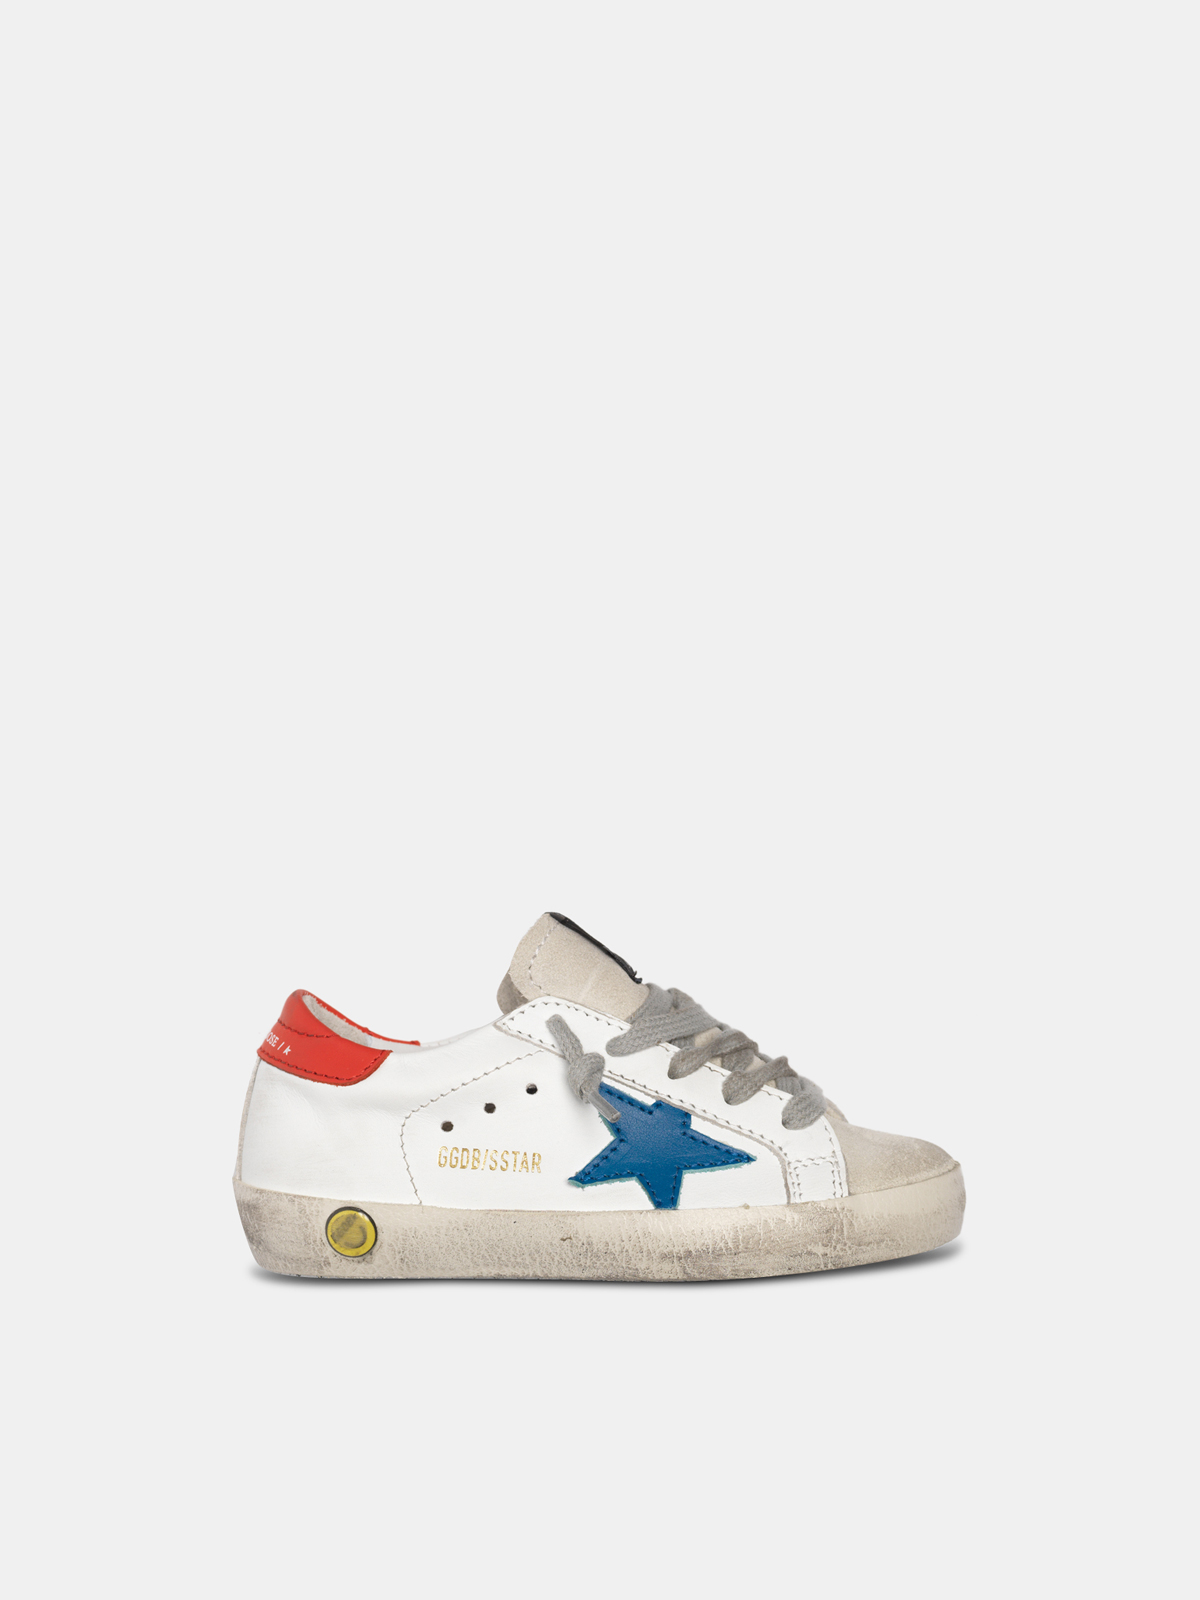 blue star and red heel tab | Golden Goose